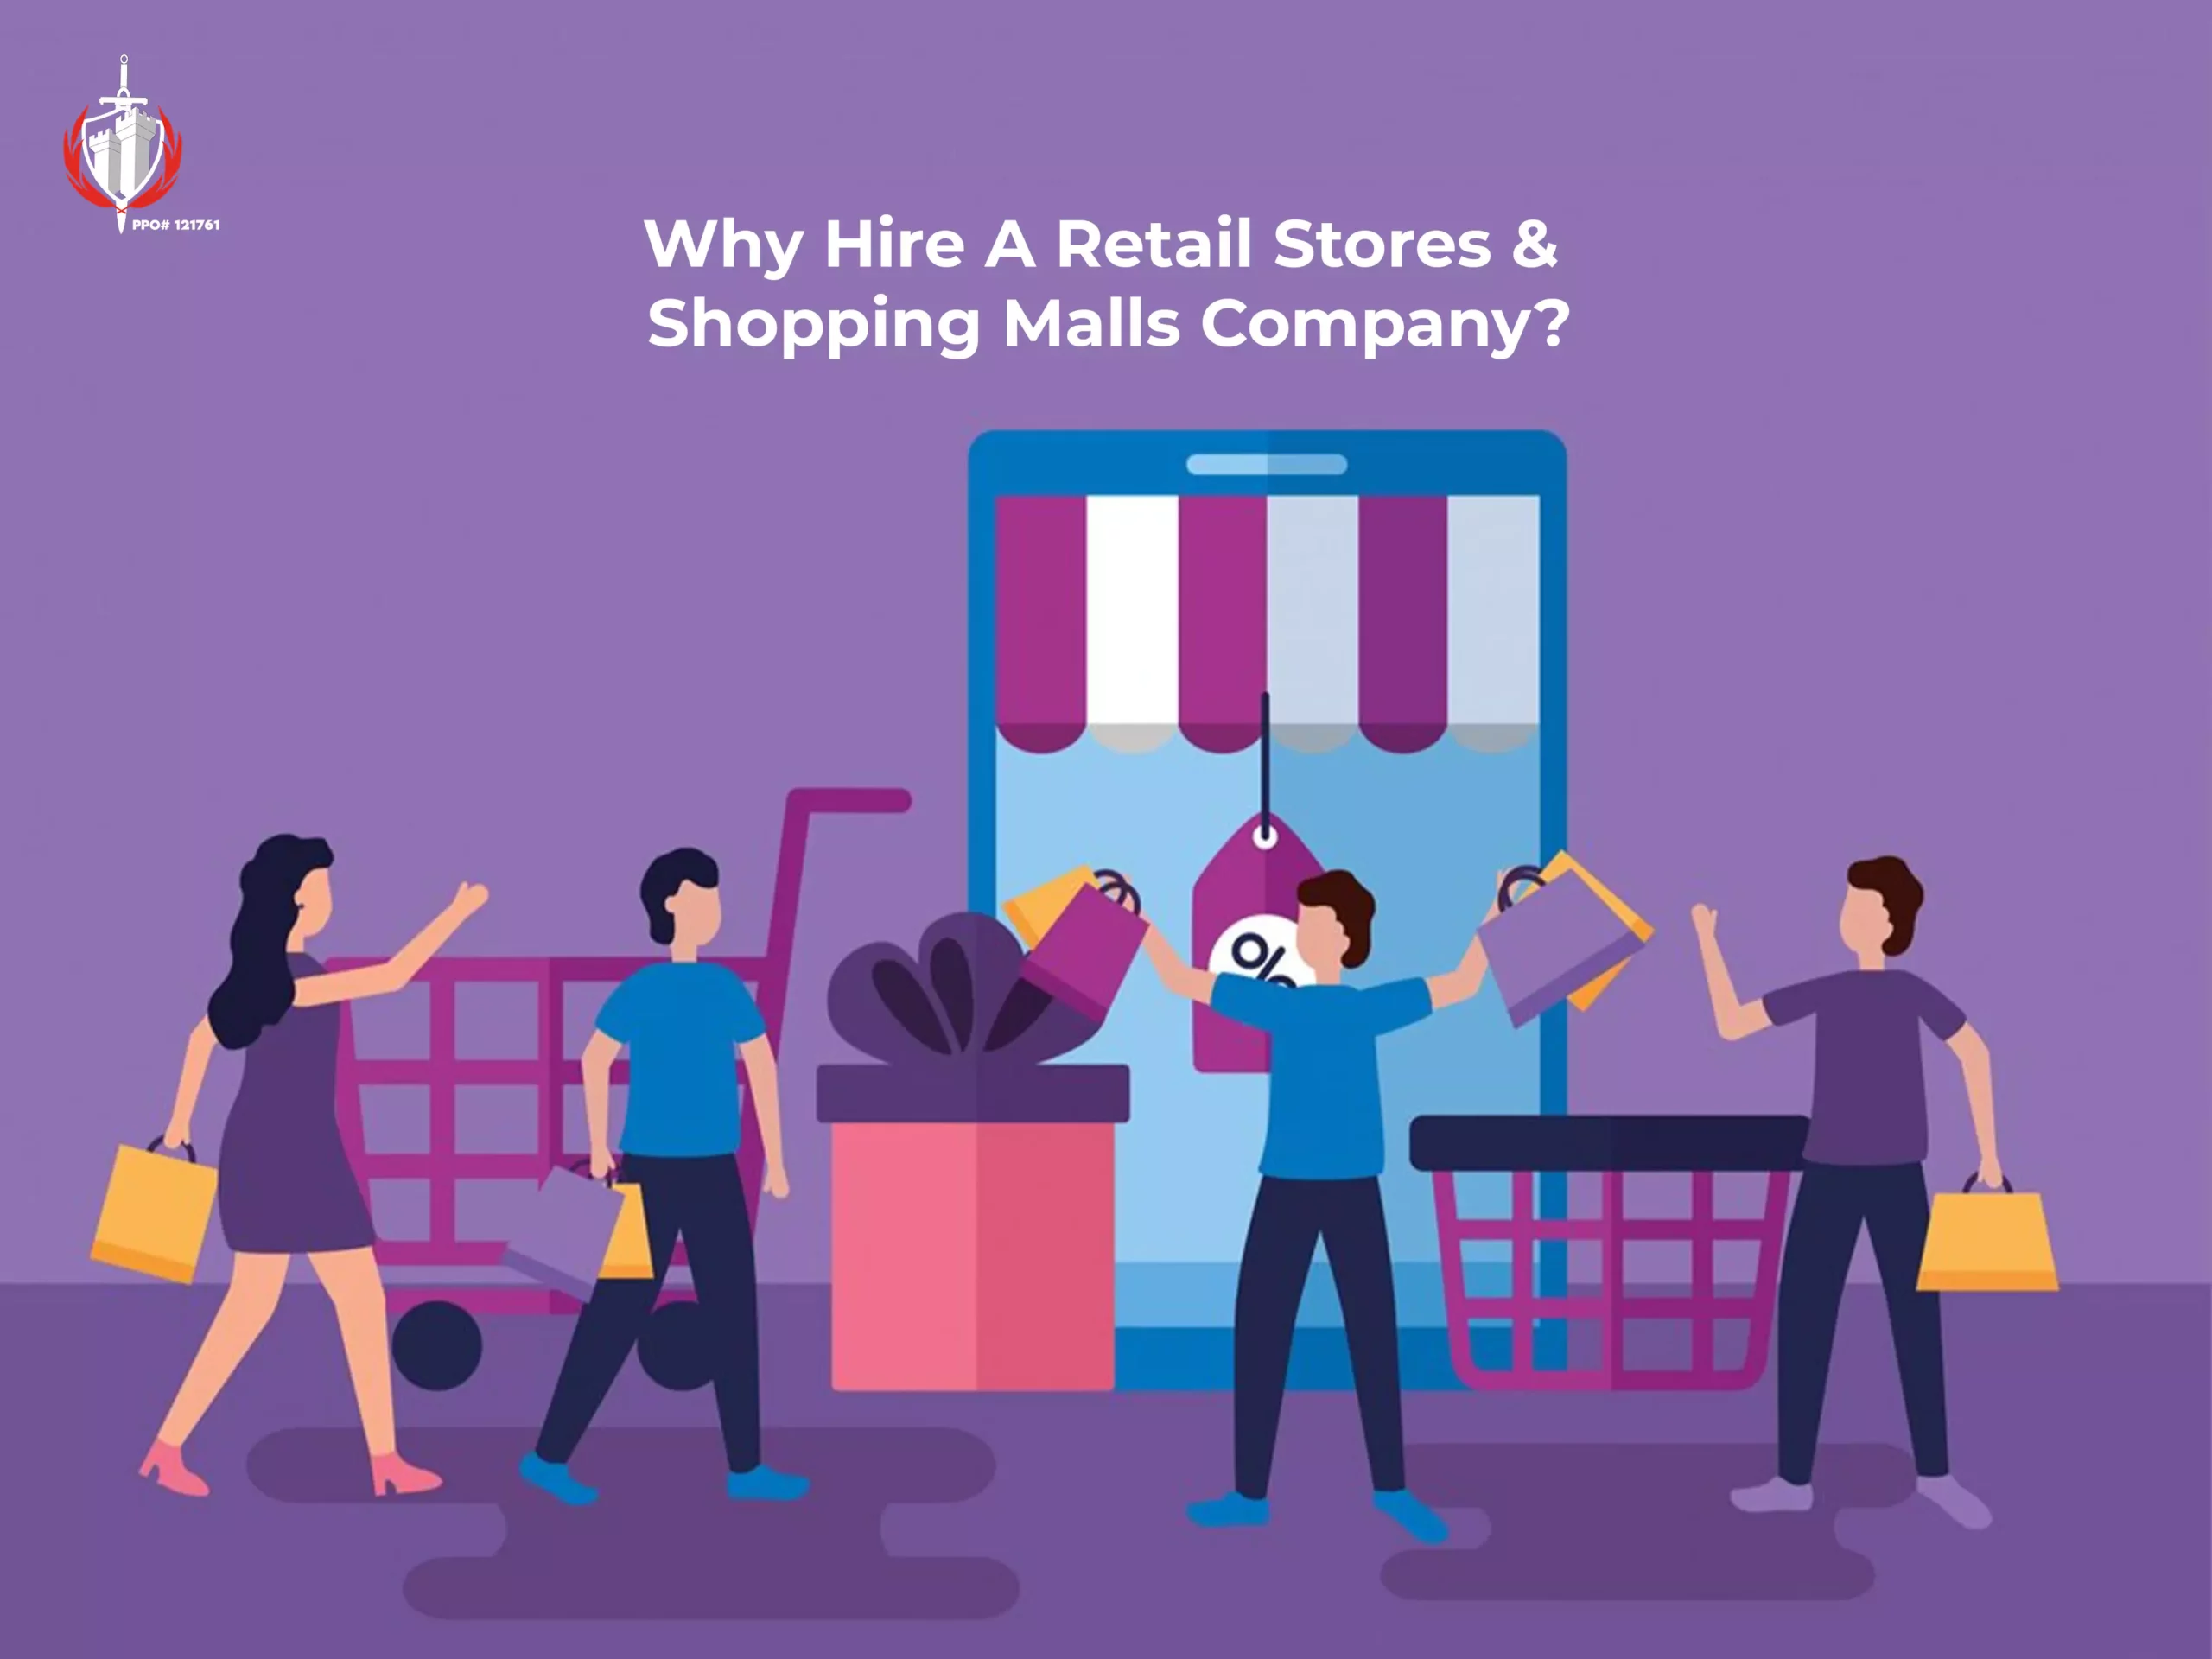 Why Hire A Retail Stores & Shopping Malls Company